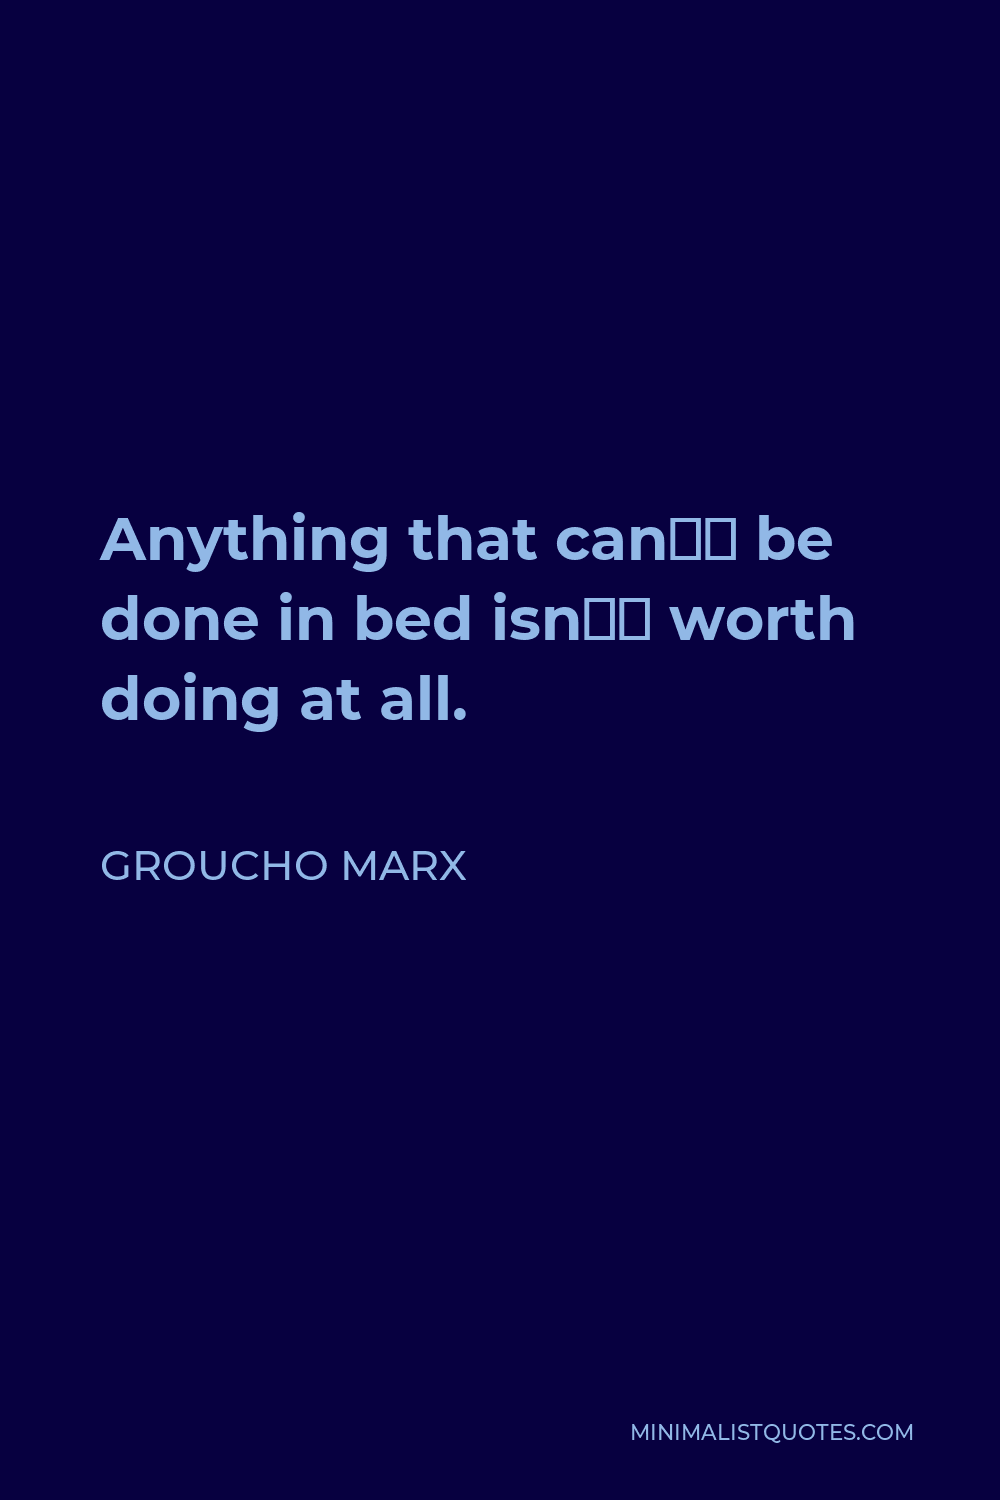 Groucho Marx Quote - Anything that can’t be done in bed isn’t worth doing at all.